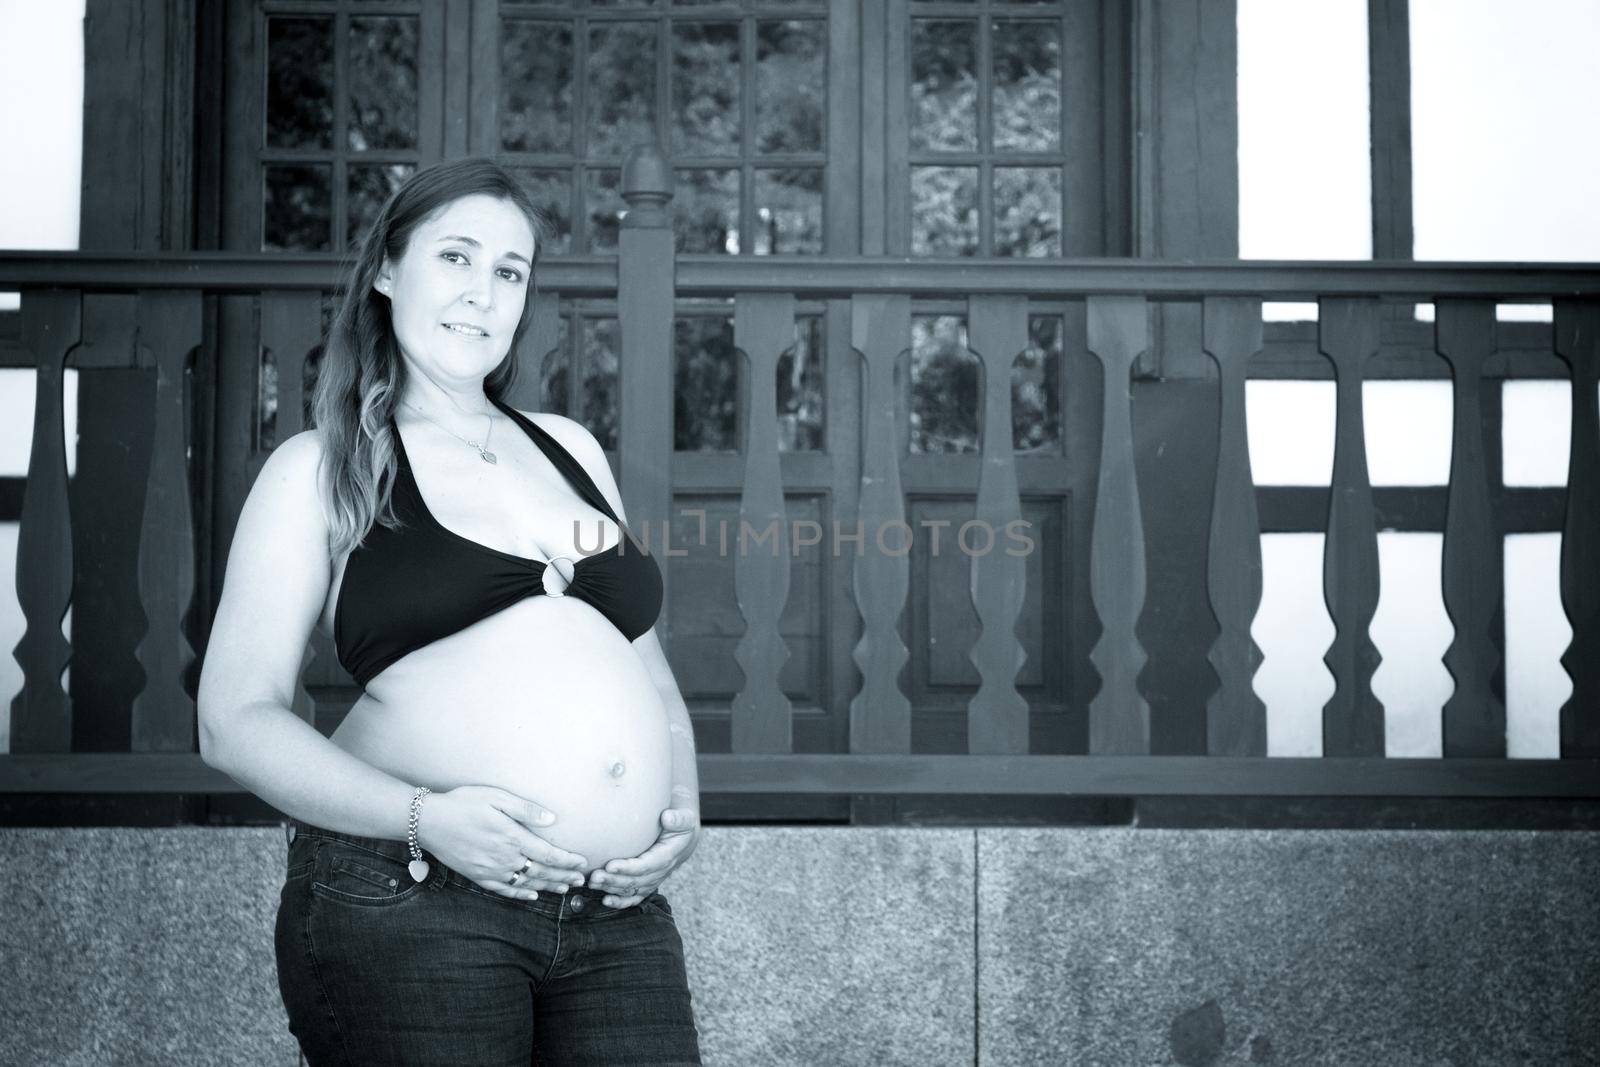 Seven months pregnant young woman dressed in black bikini and jeans